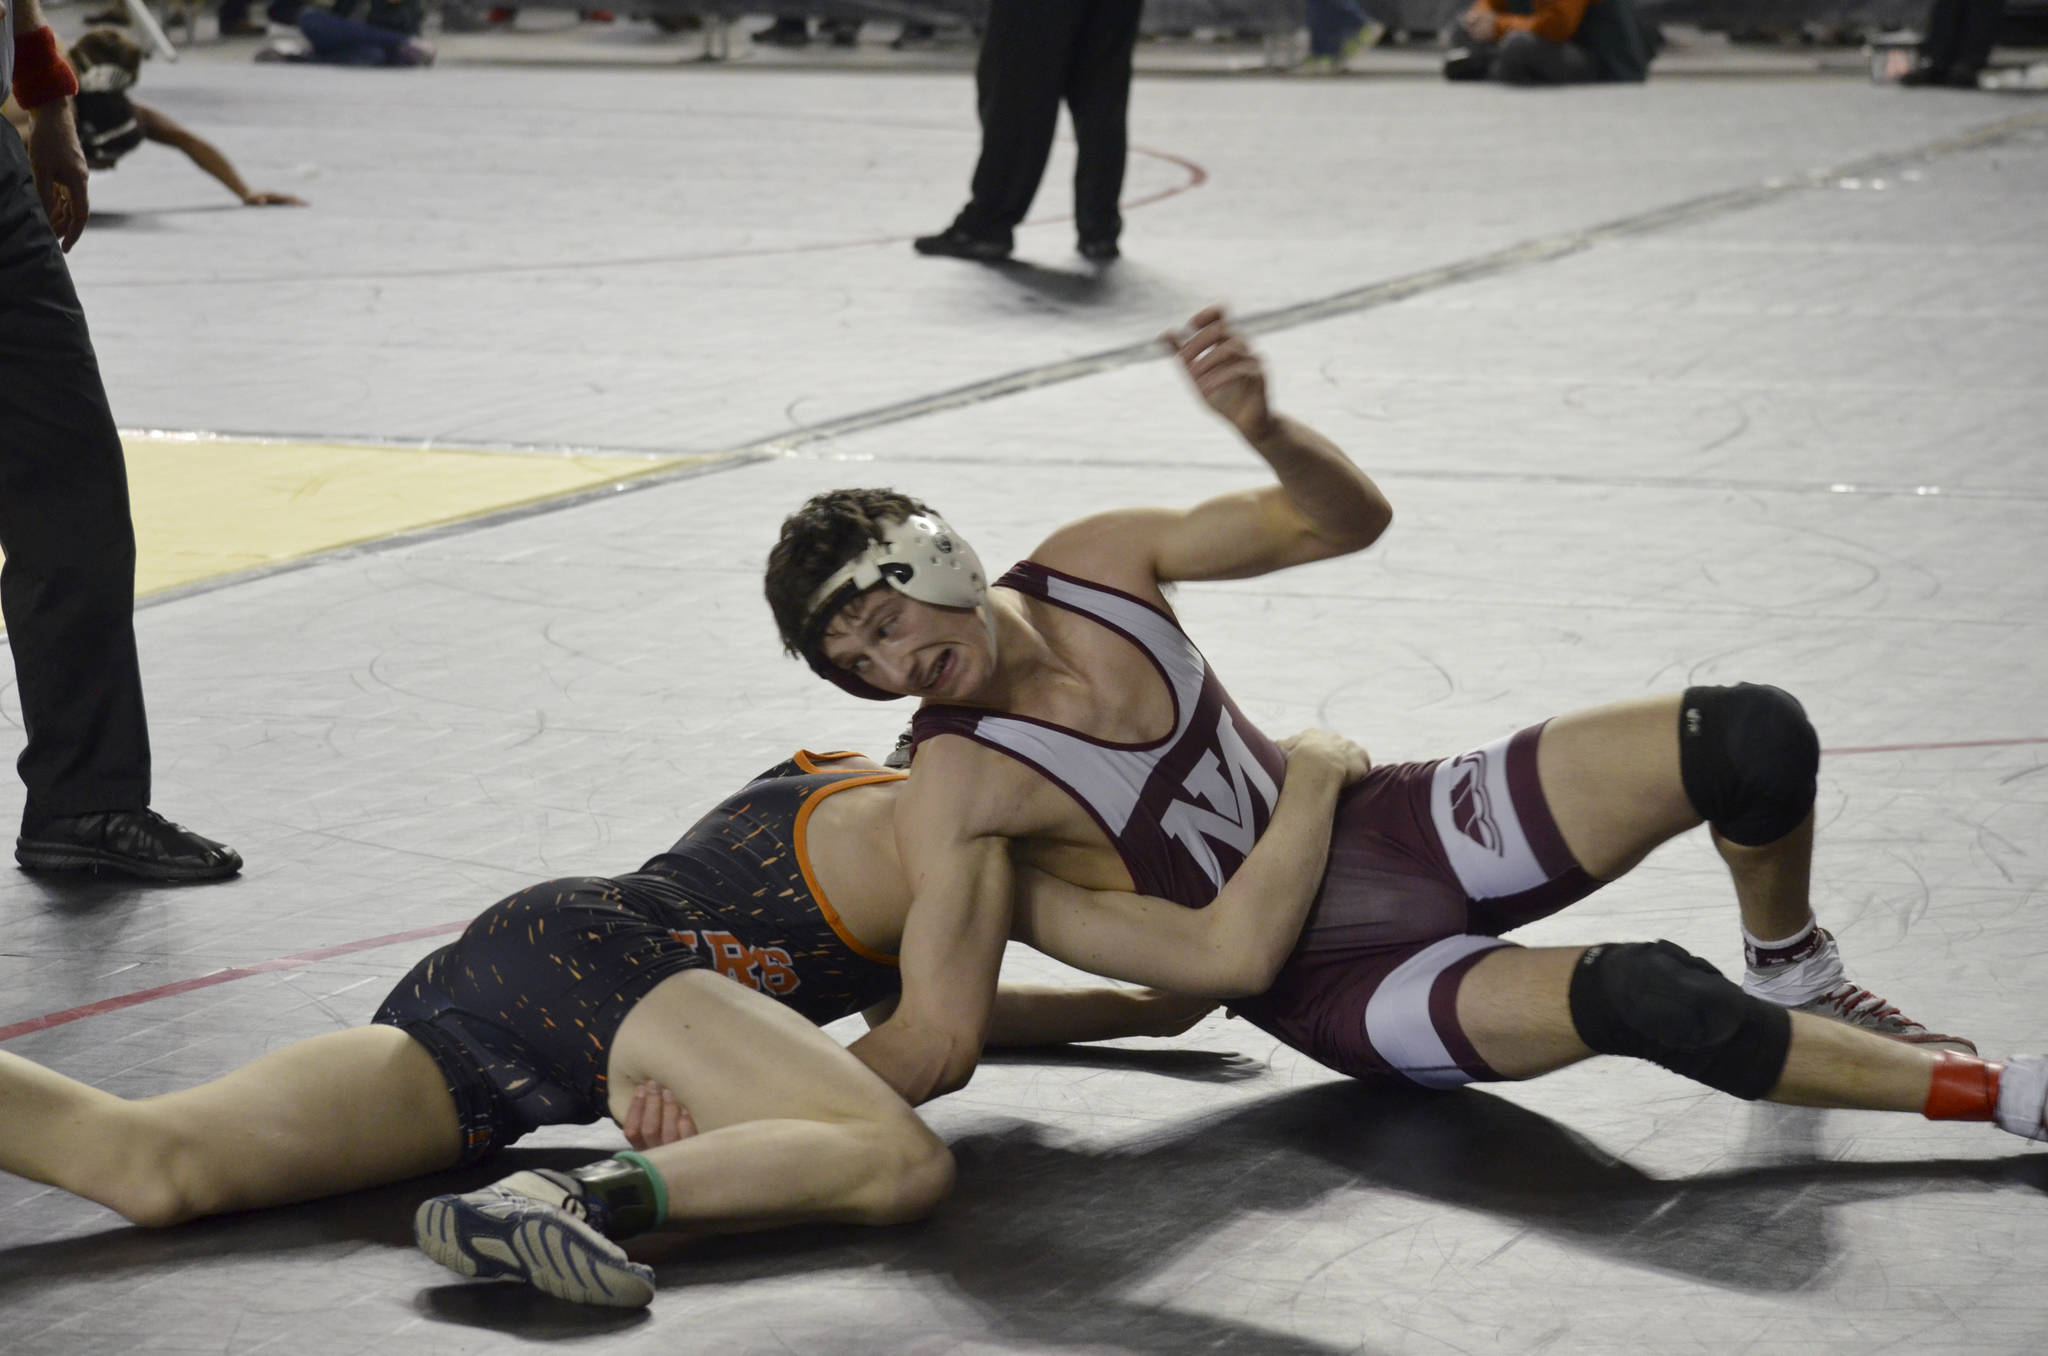 Mercer Island Islanders senior grappler Eli Pruchno, who competed in the 138-pound weight division, earned three victories at the Mat Classic Class 3A state wrestling tournament on Feb. 15-16 at the Tacoma Dome. Photo courtesy of Billy Pruchno